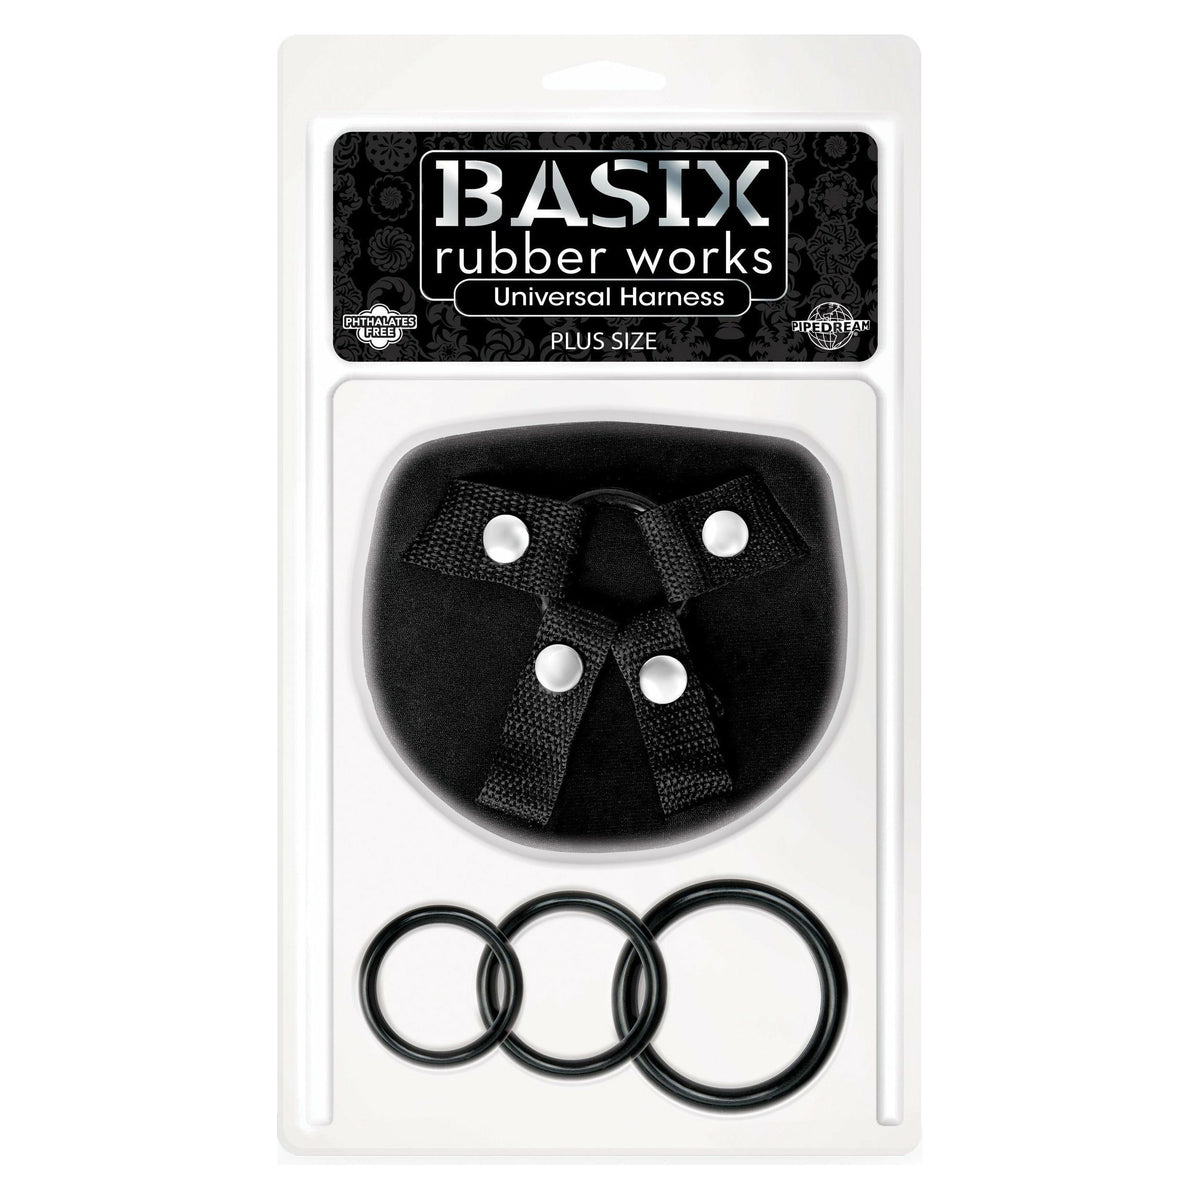 Pipedream Products BASIX Rubber Works Universal Harness - Plus Sized